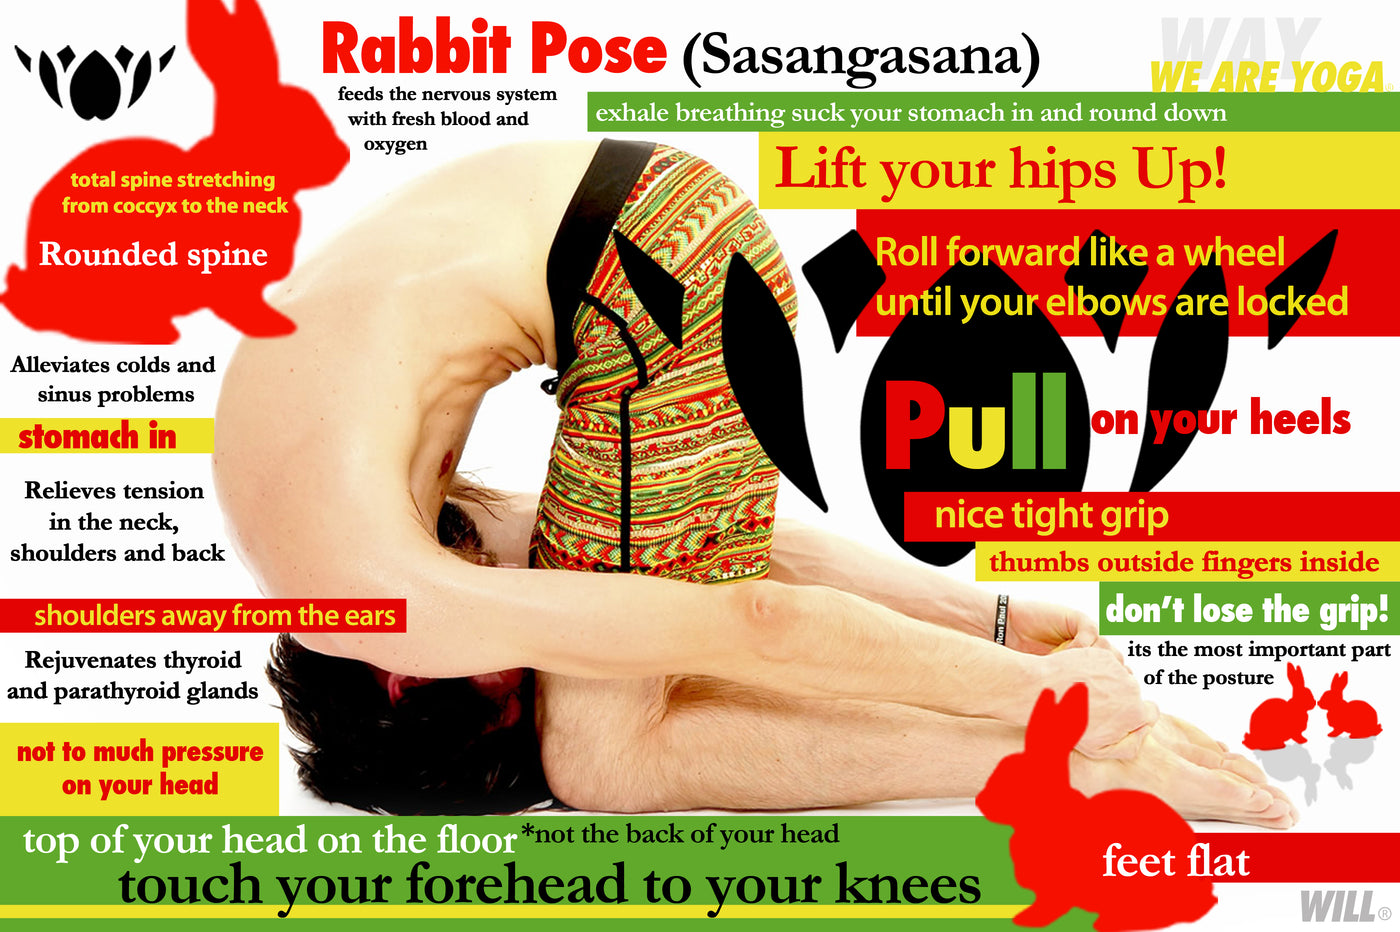 Amrita Yoga - Rabbit Pose (Sasangasana) - gentle inversion that stimulates  the hypothalamus and pineal glands, supporting the whole endocrine system.  Excellent to practice before bed as part of a treatment for